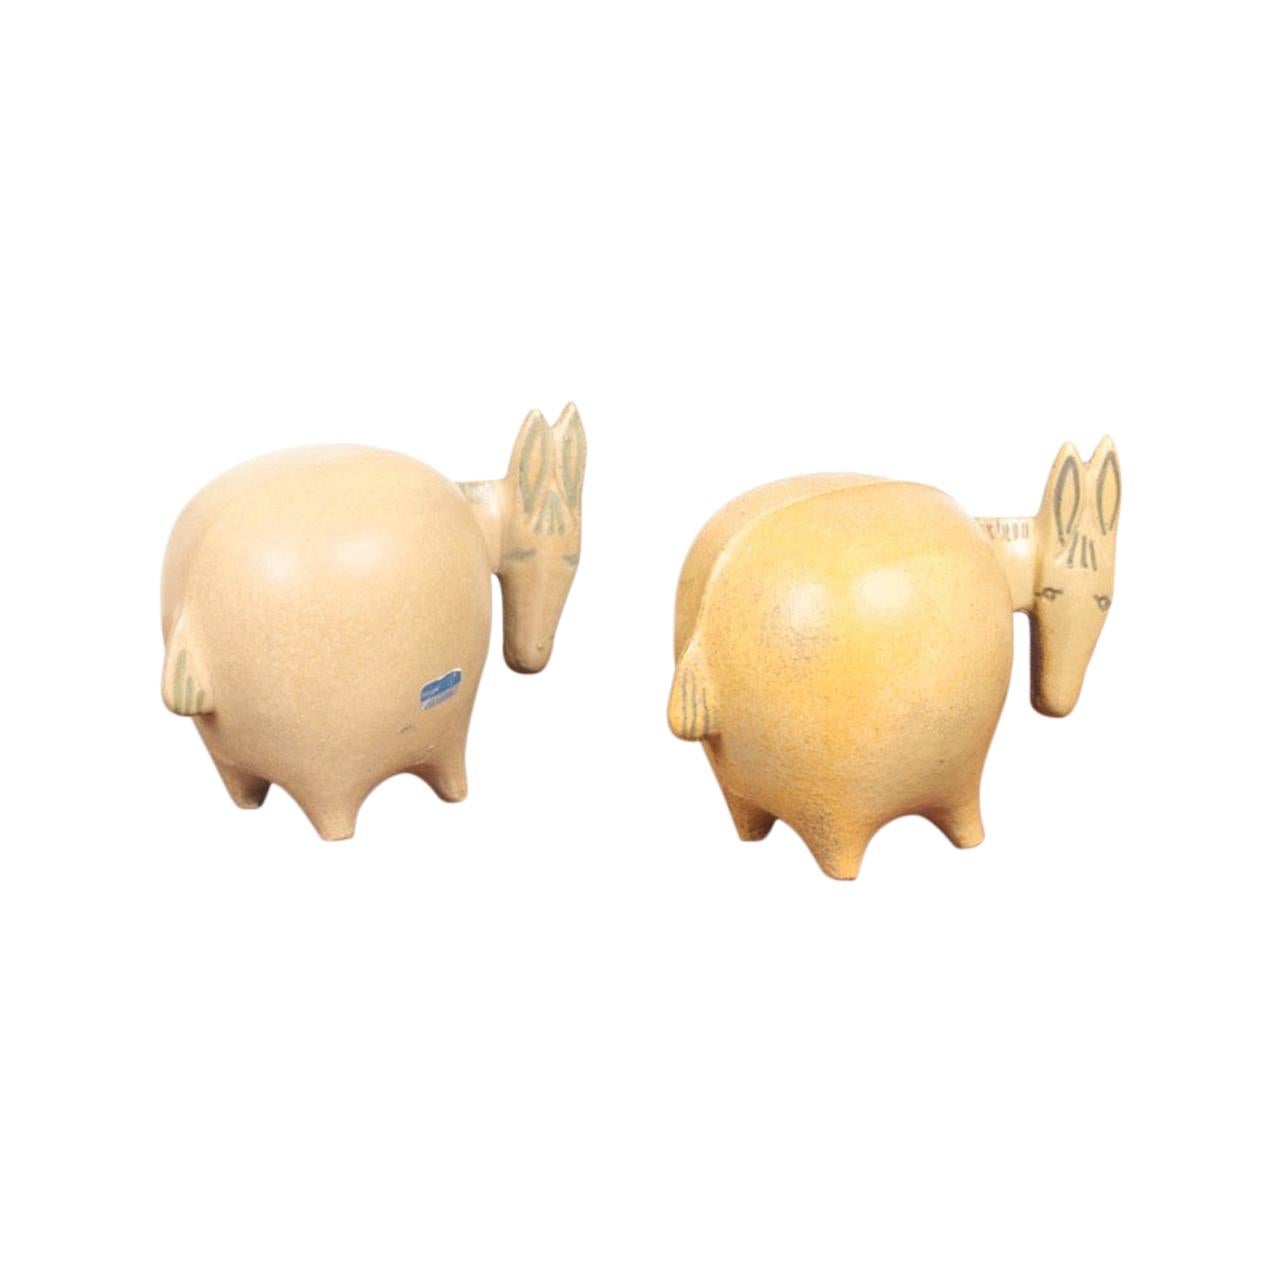 Pair of Midcentury Donkey Figurines by Lisa Larson, 1960s For Sale